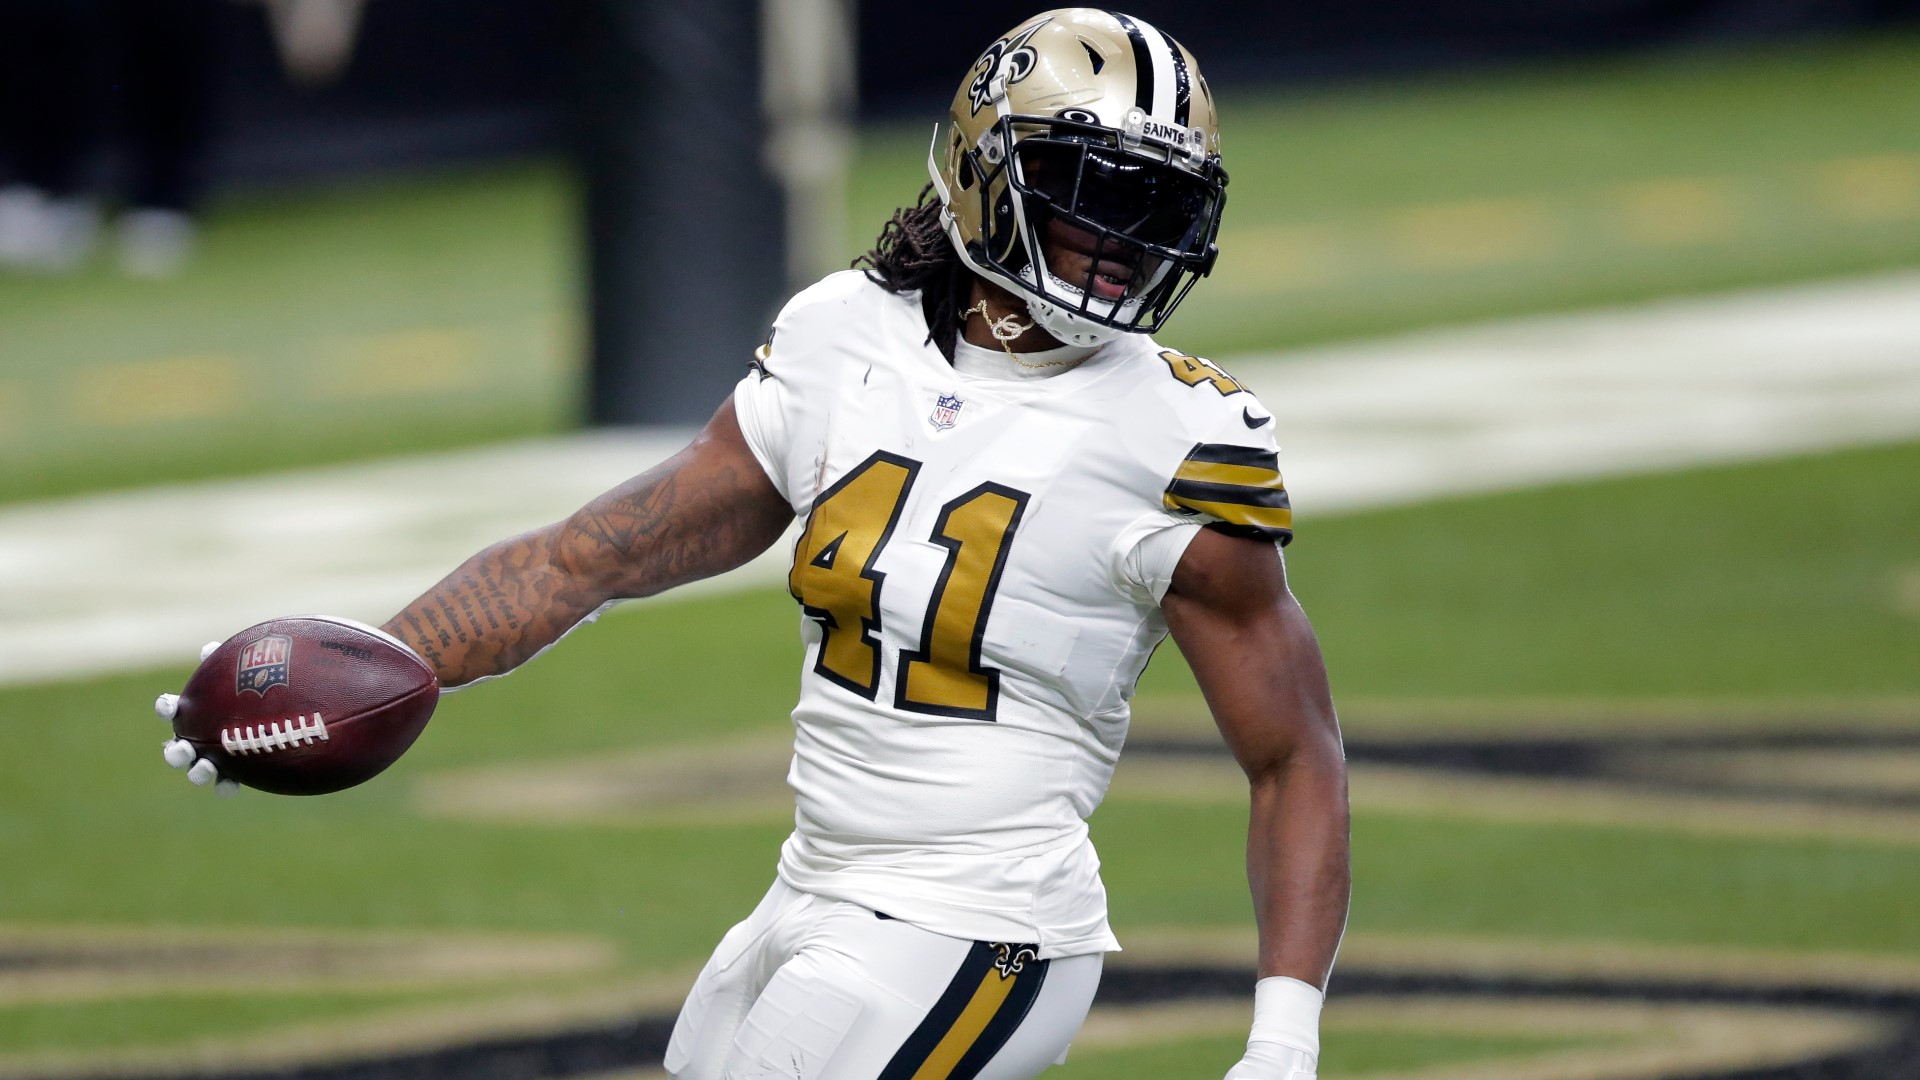 Doug Mouton has his 4 takeaways from the Saints win over the Vikings.